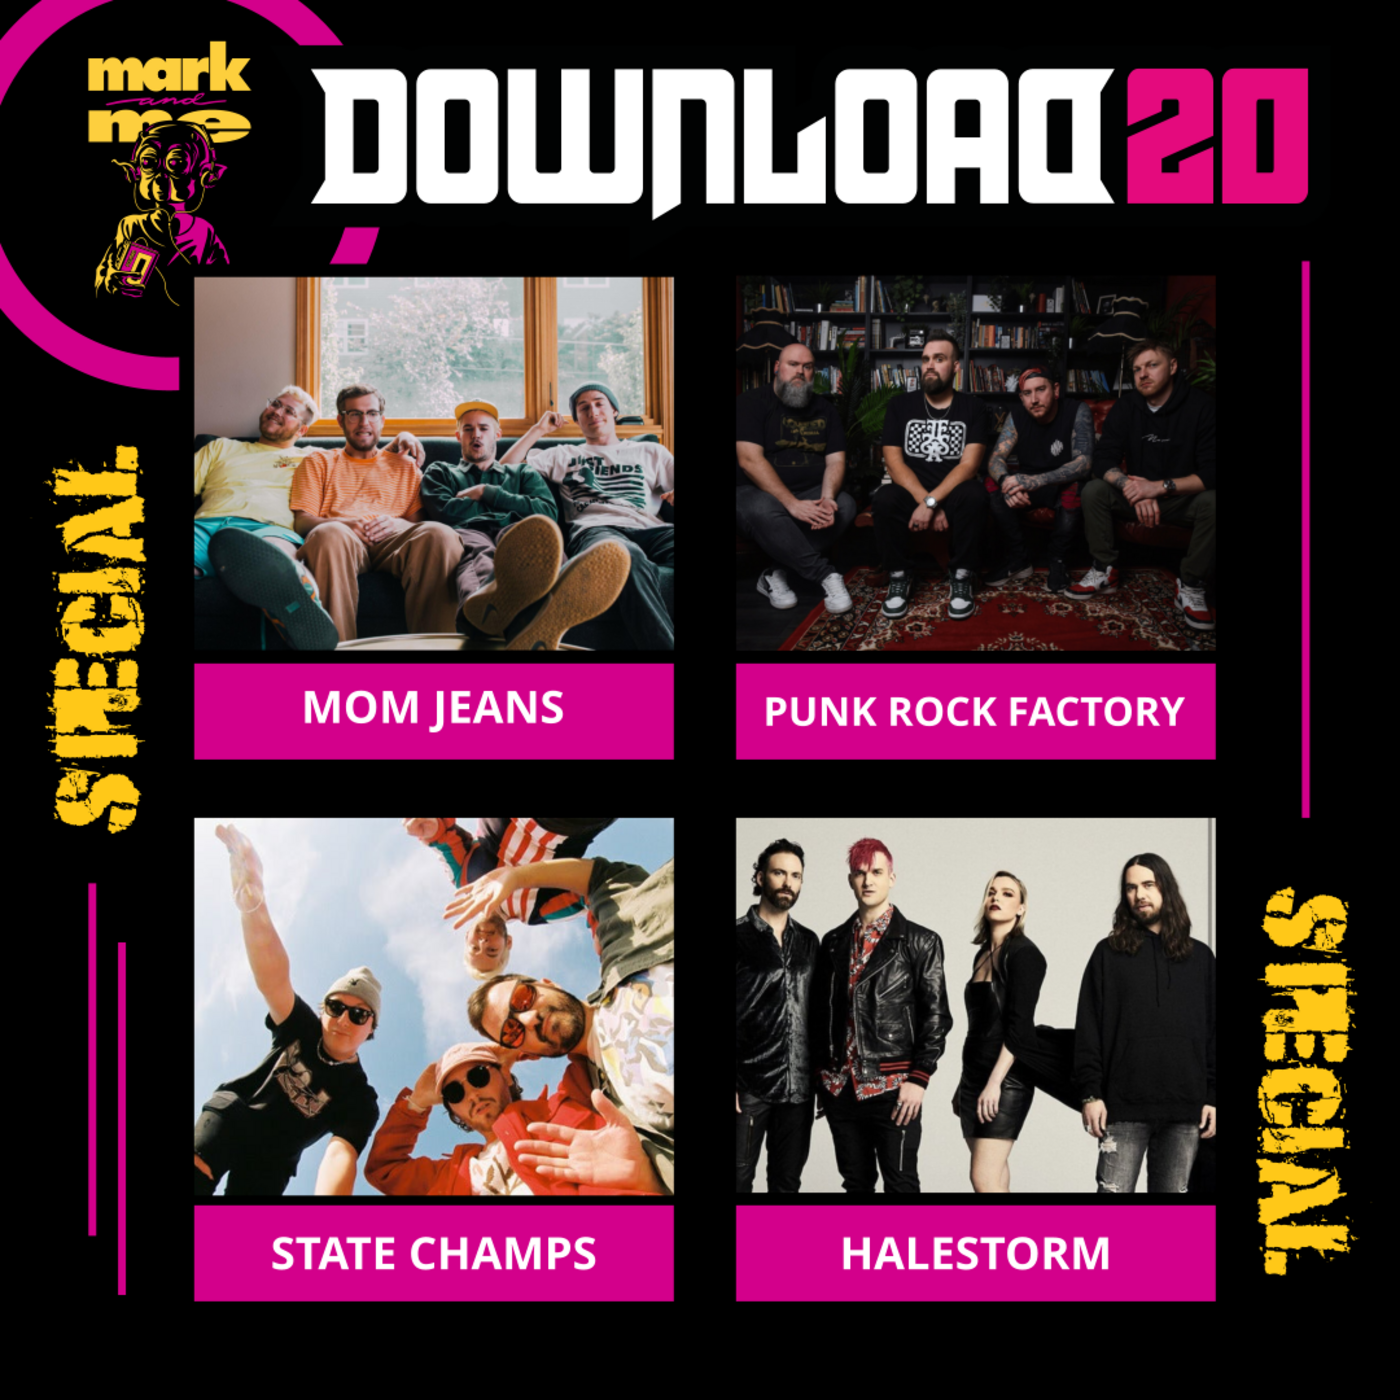 Episode 276: Download Festival Special - Mom Jeans, Punk Rock Factory, State Champs and Halestorm